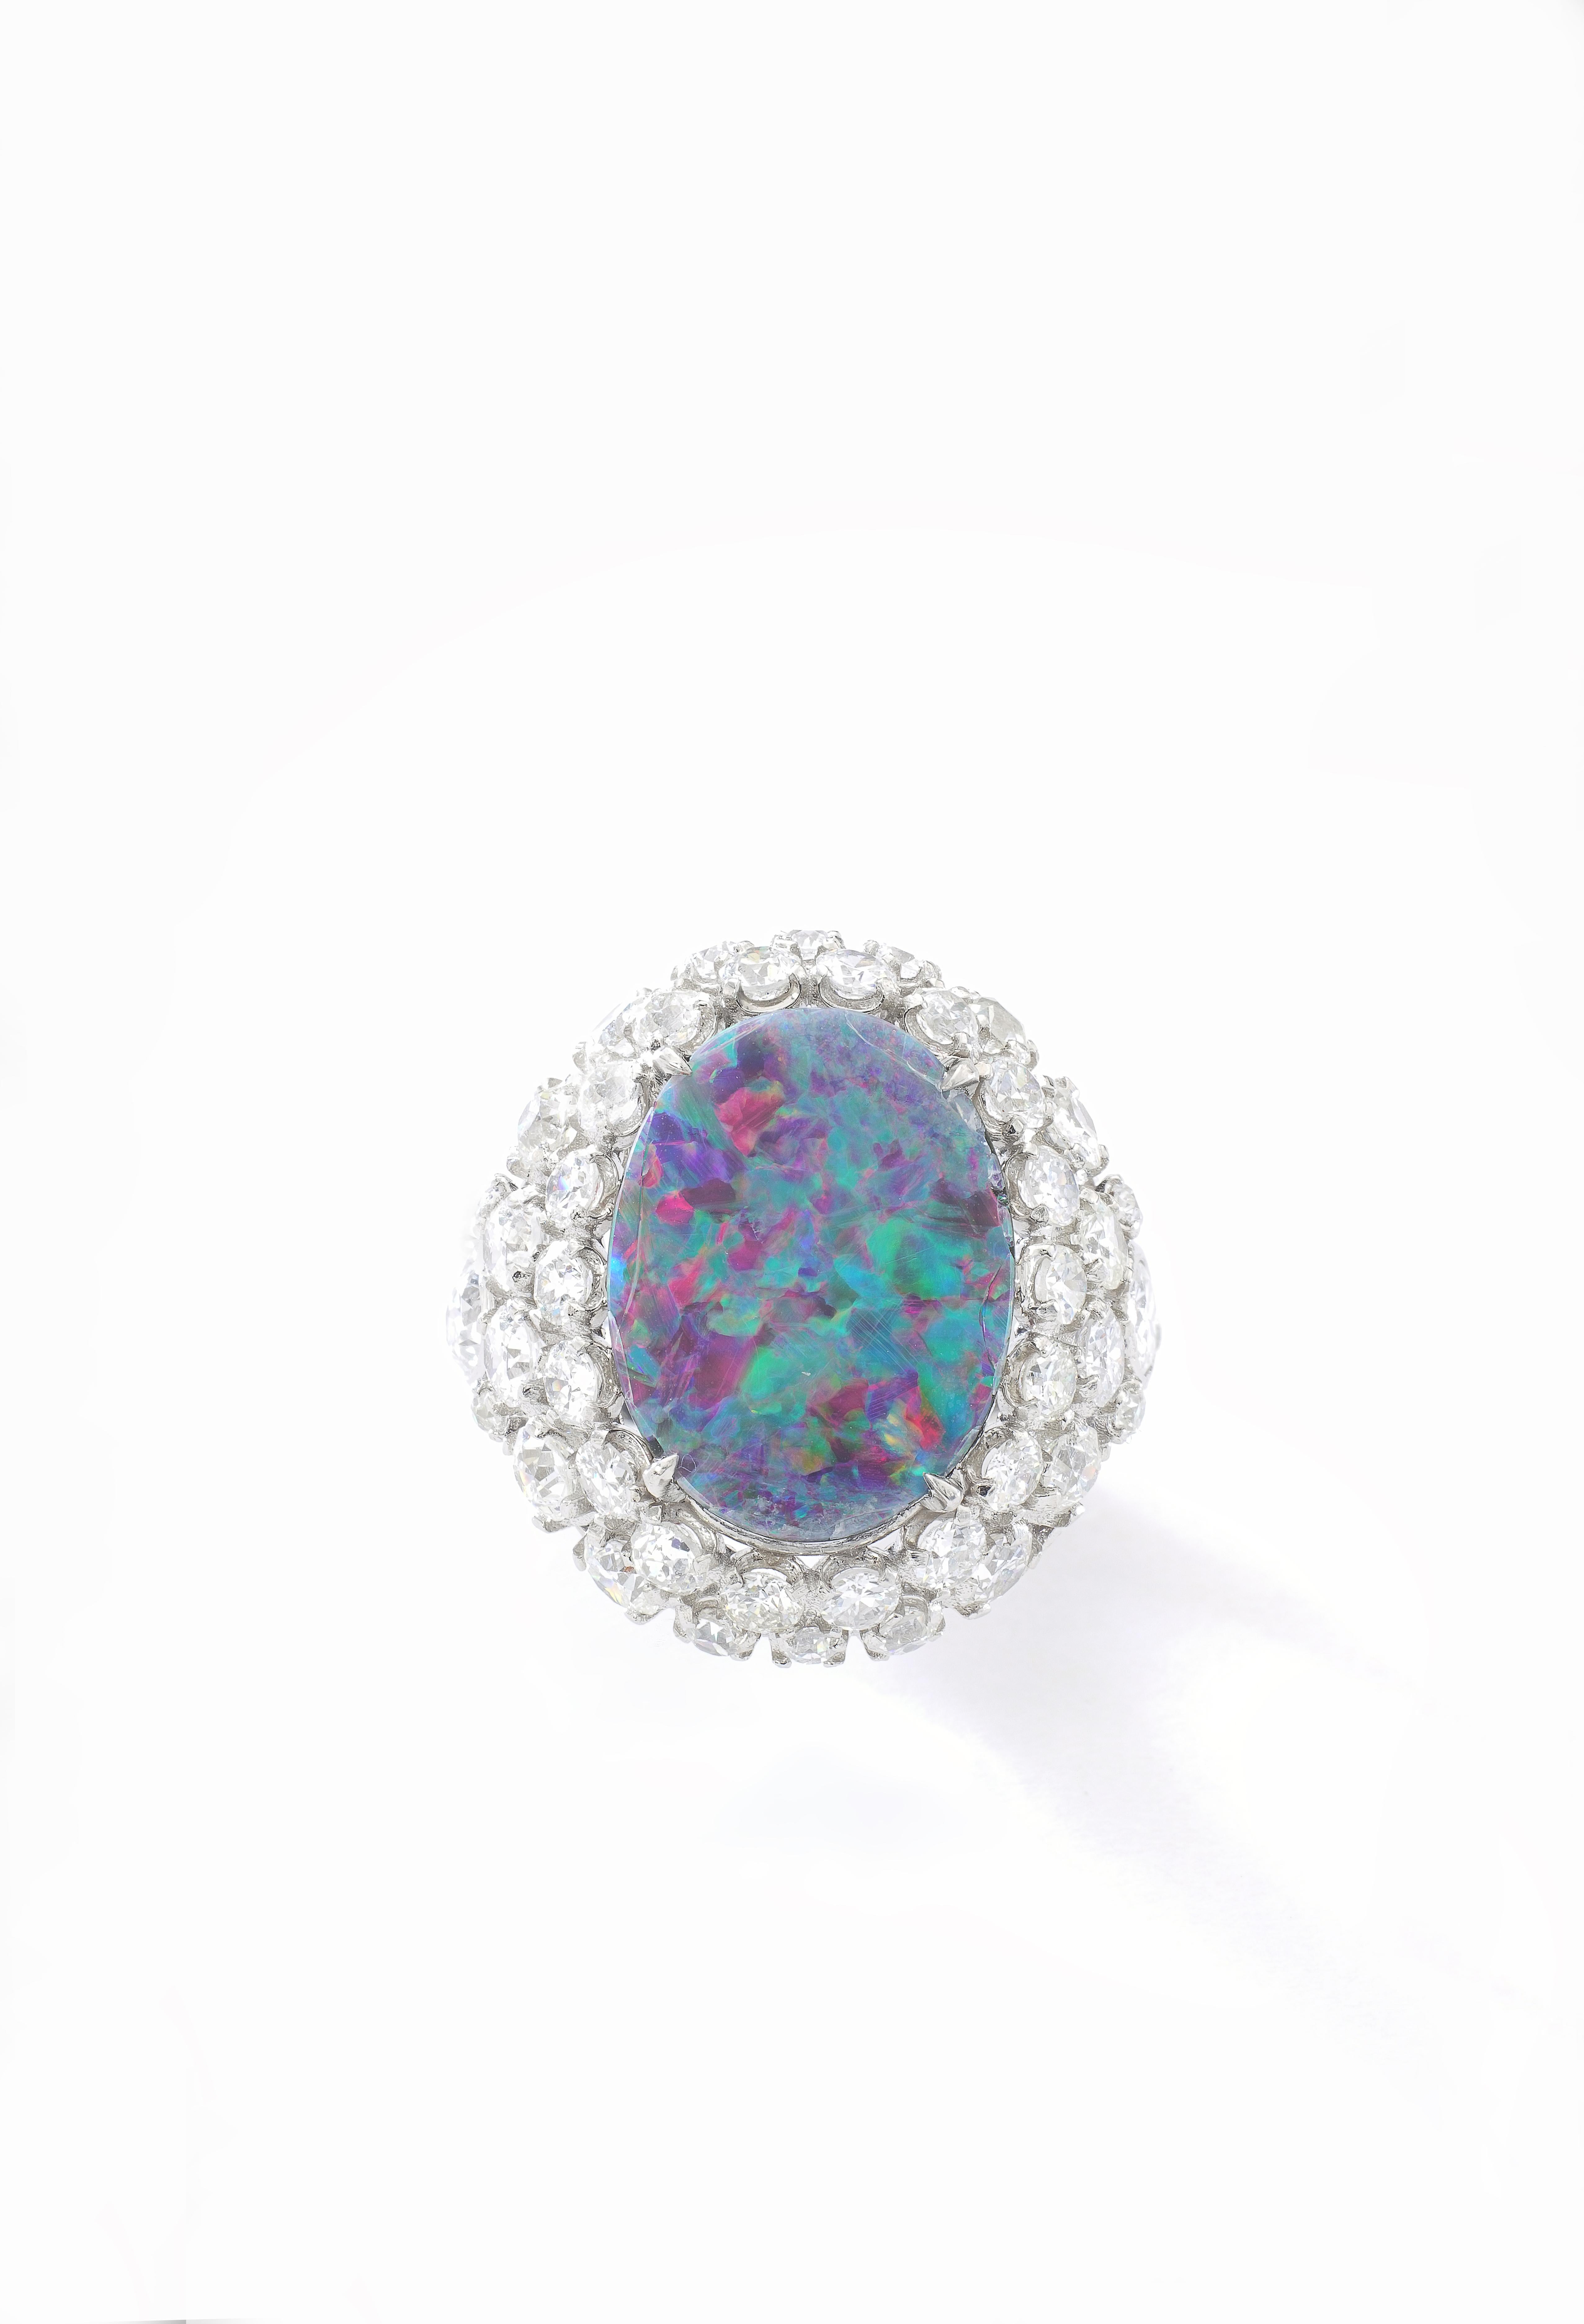 Opal Black doublet surrounded by Diamond on Platinum Ring.
Size: 17.00 x13.00 millimeters.

Total Diamond weight: approximately 4.80-5.00 carats.
Estimated H color, Vs clarity.